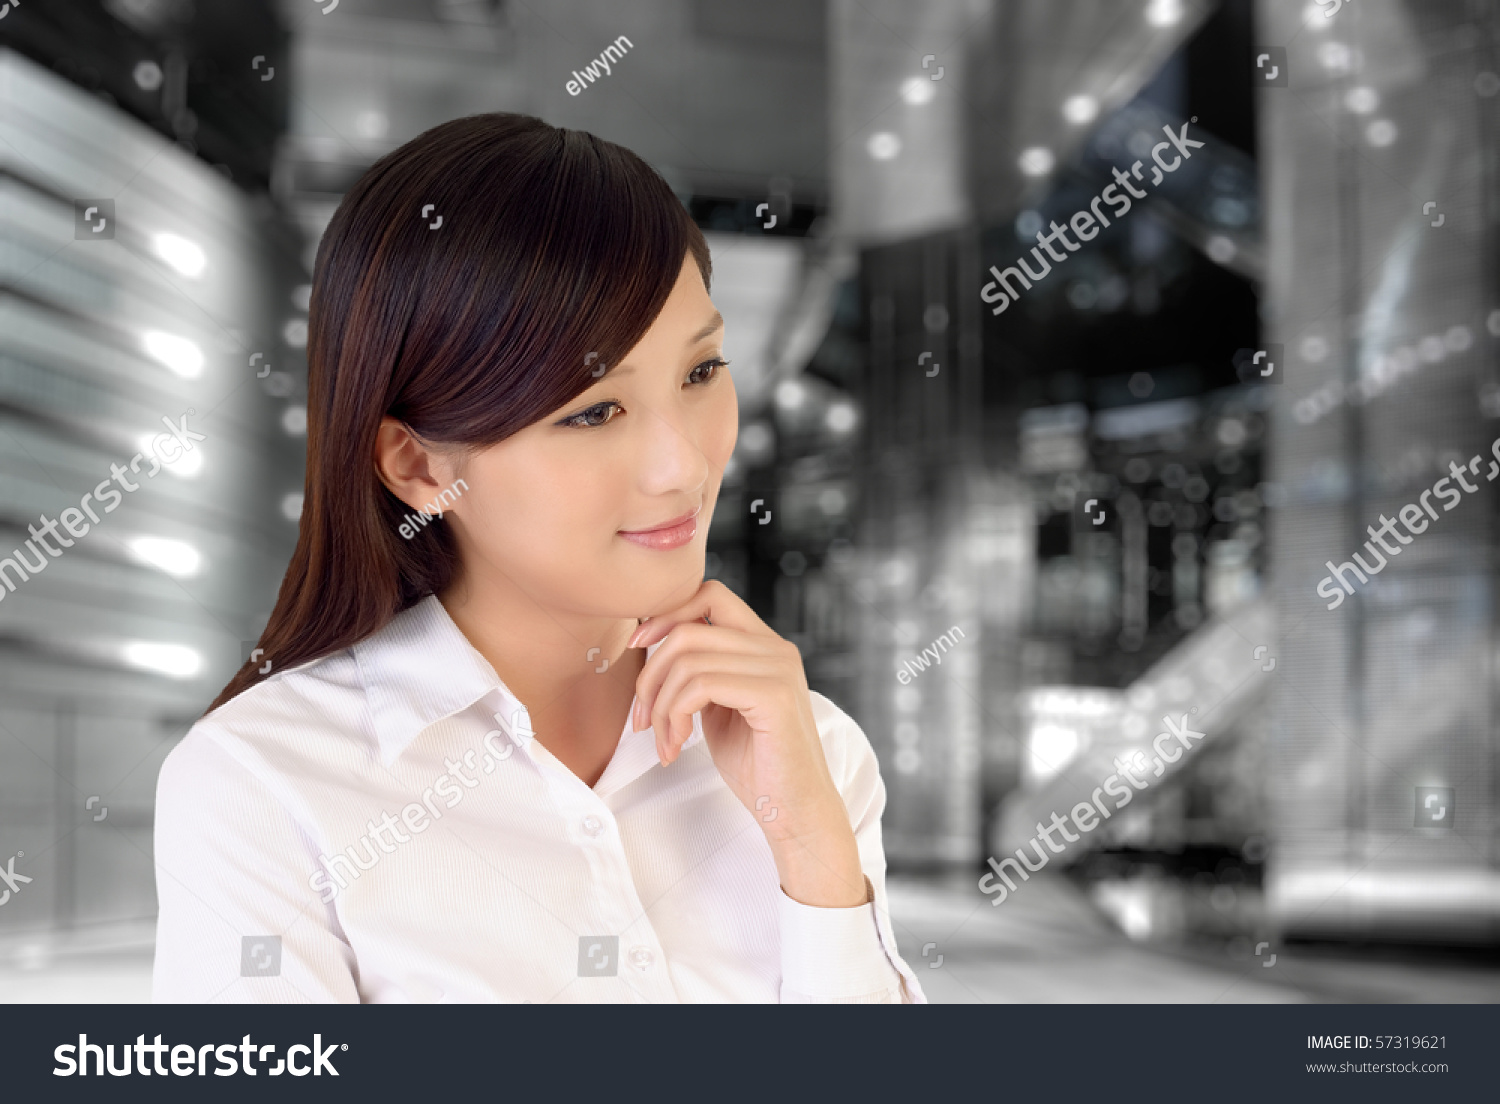 Businesswoman thinking inside of modern architecture, closeup portrait of oriental office lady. #57319621